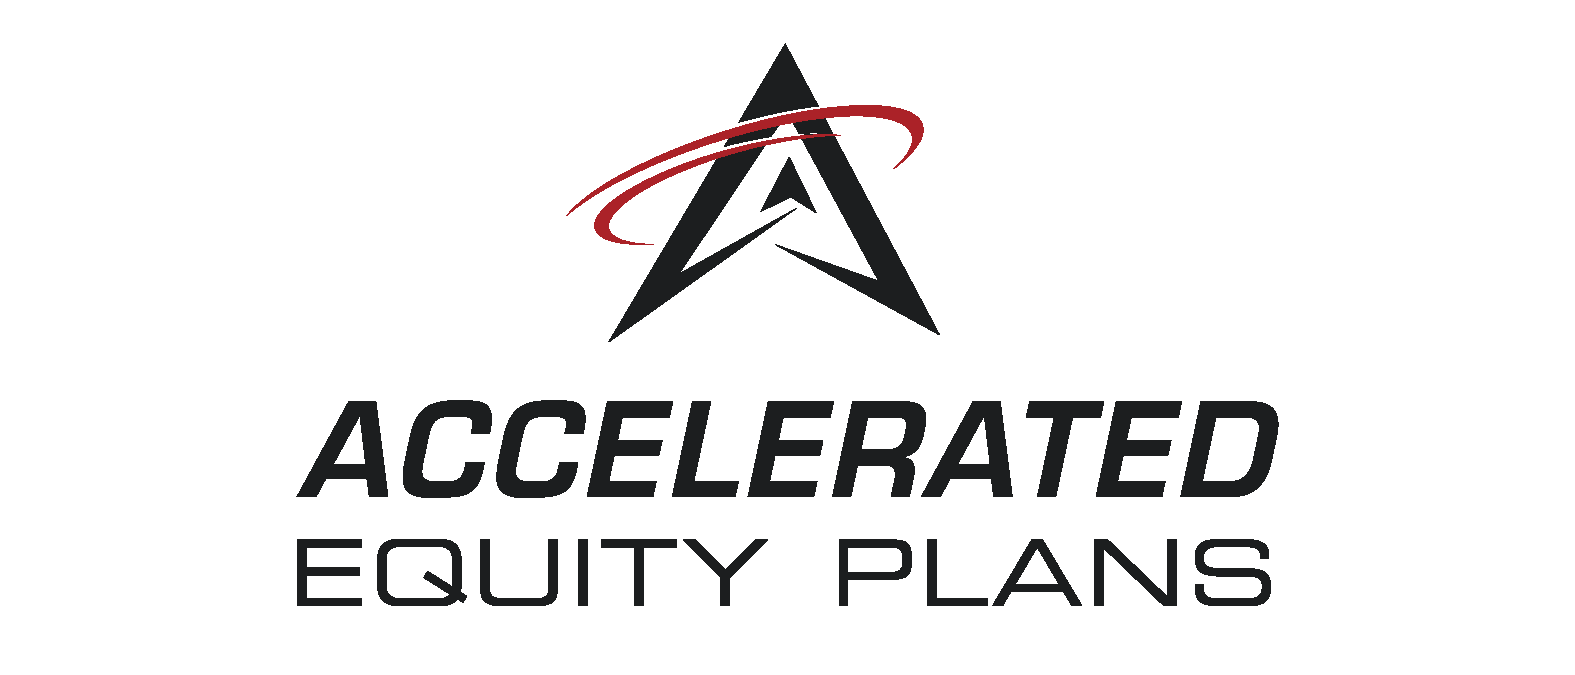 Accelerated Equity Plans